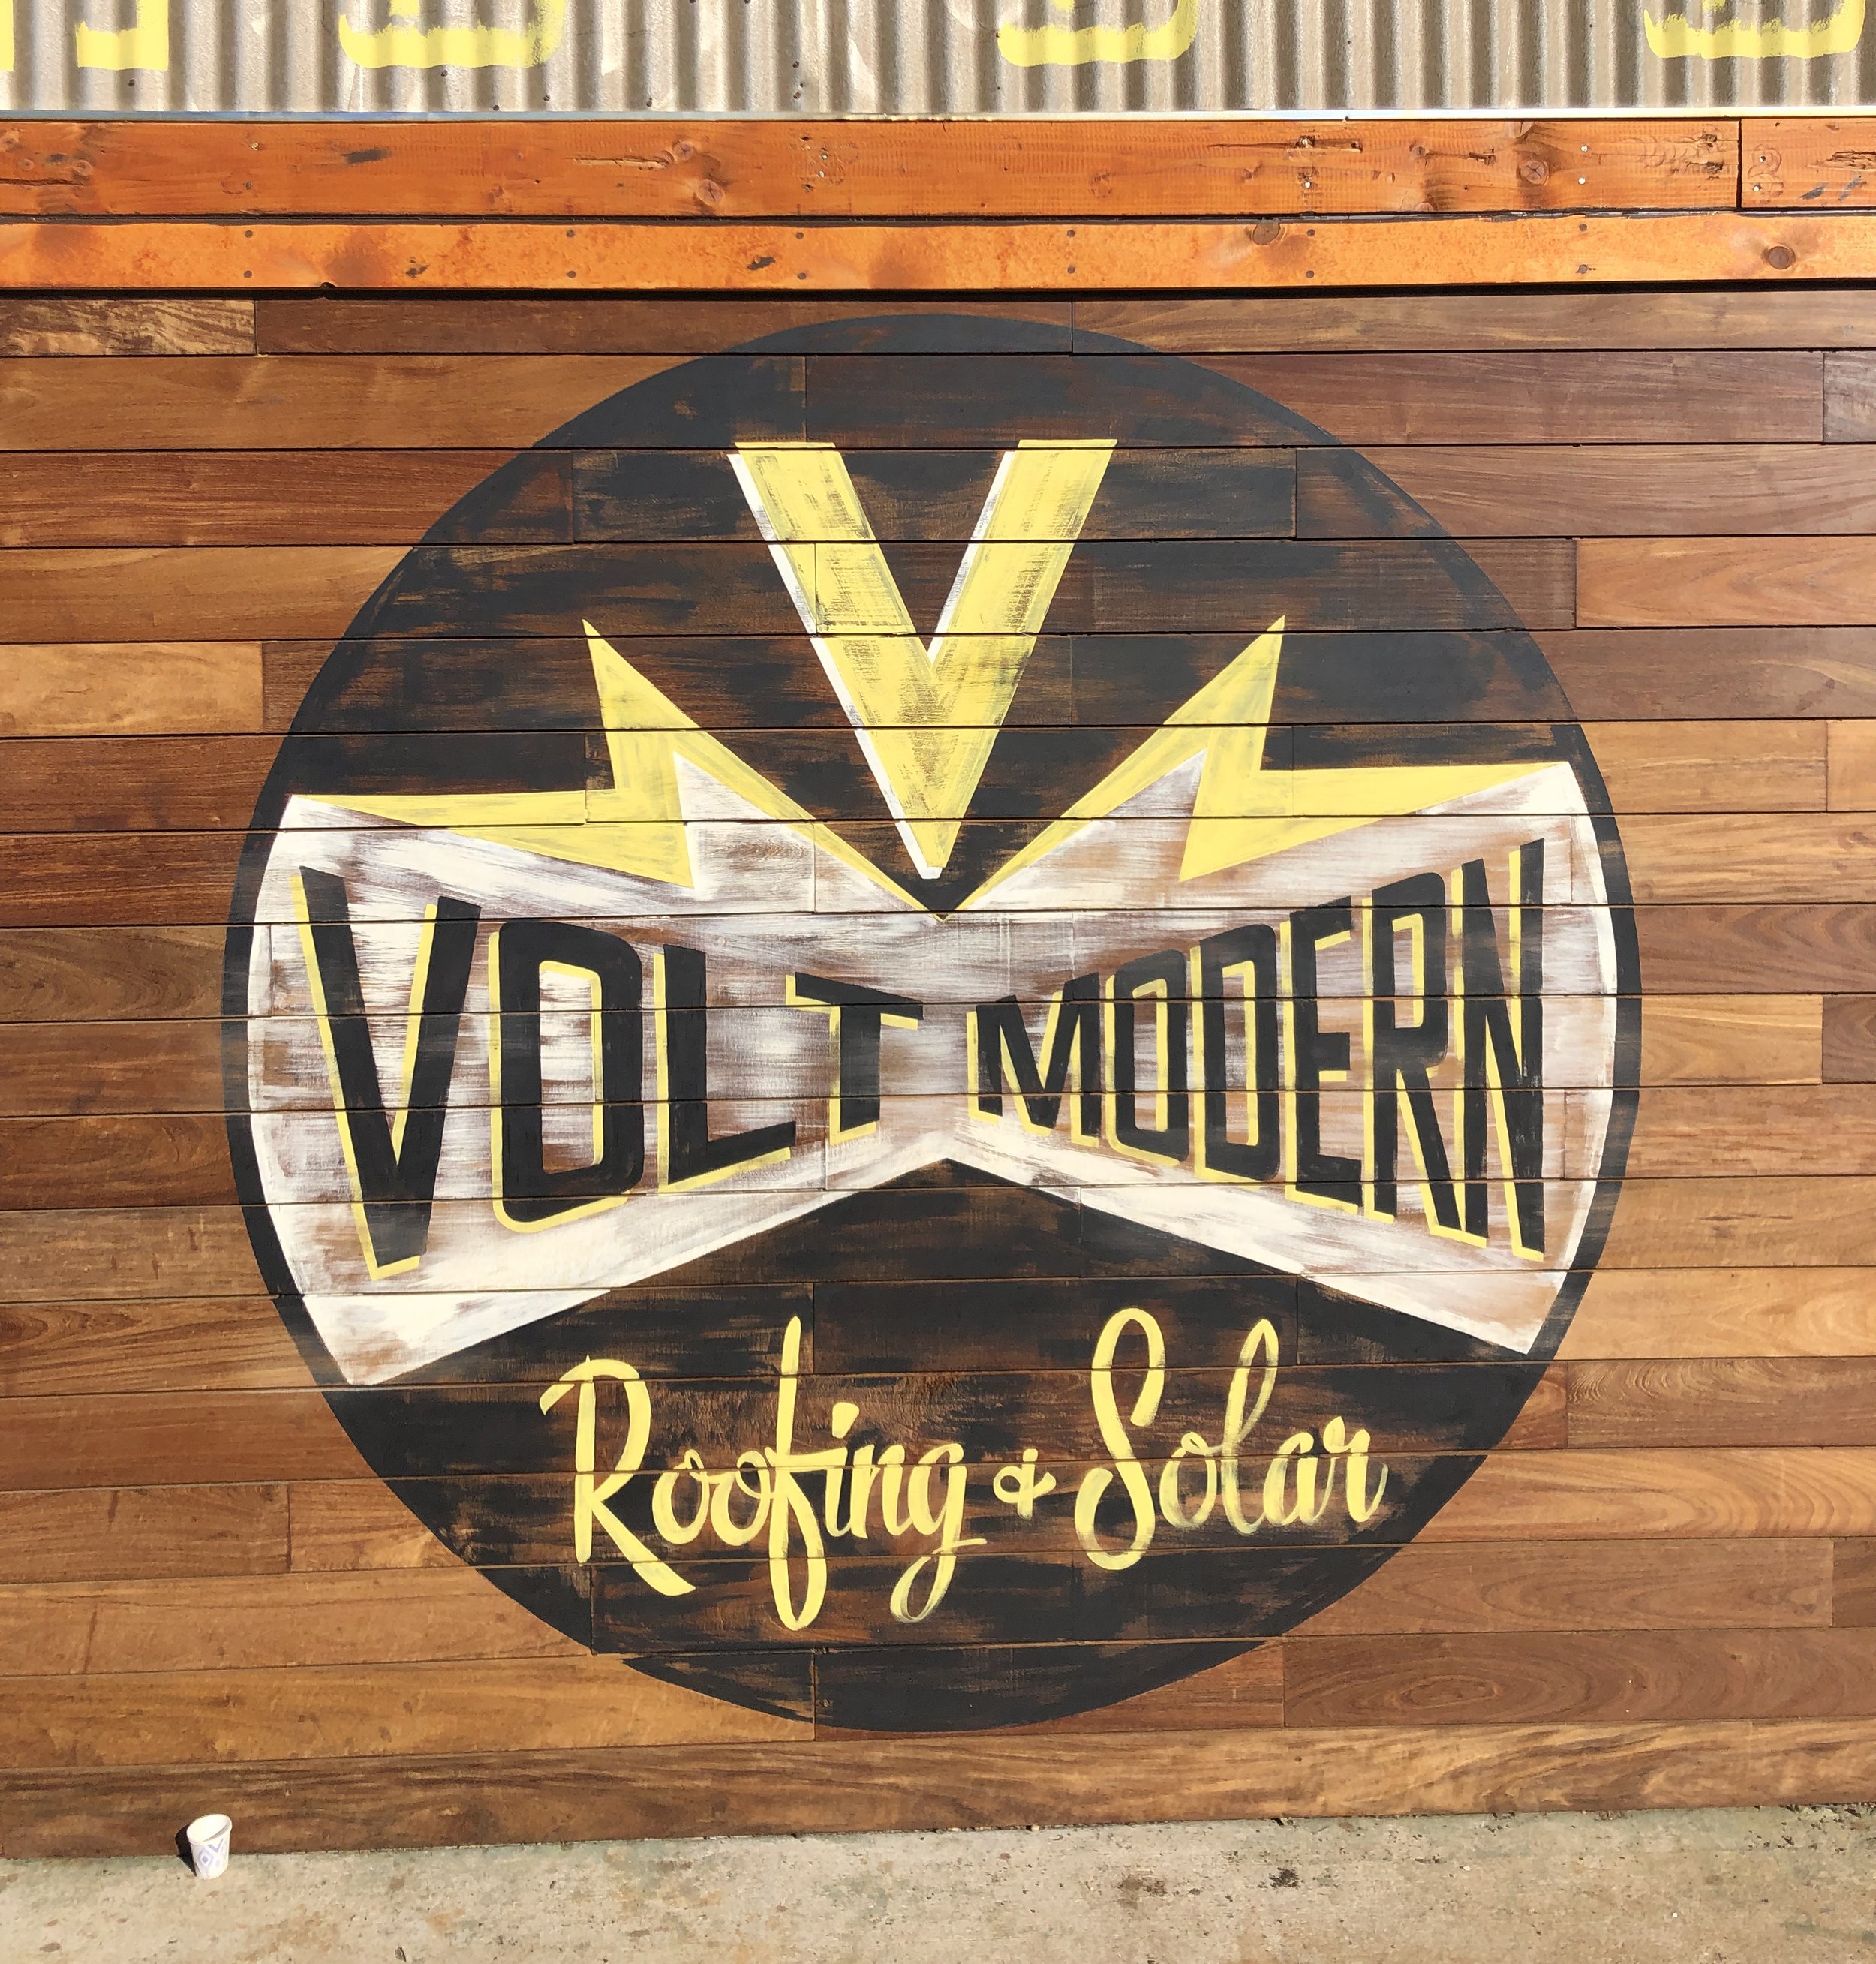 Volt Modern Roofing and Solar Wheatland CA